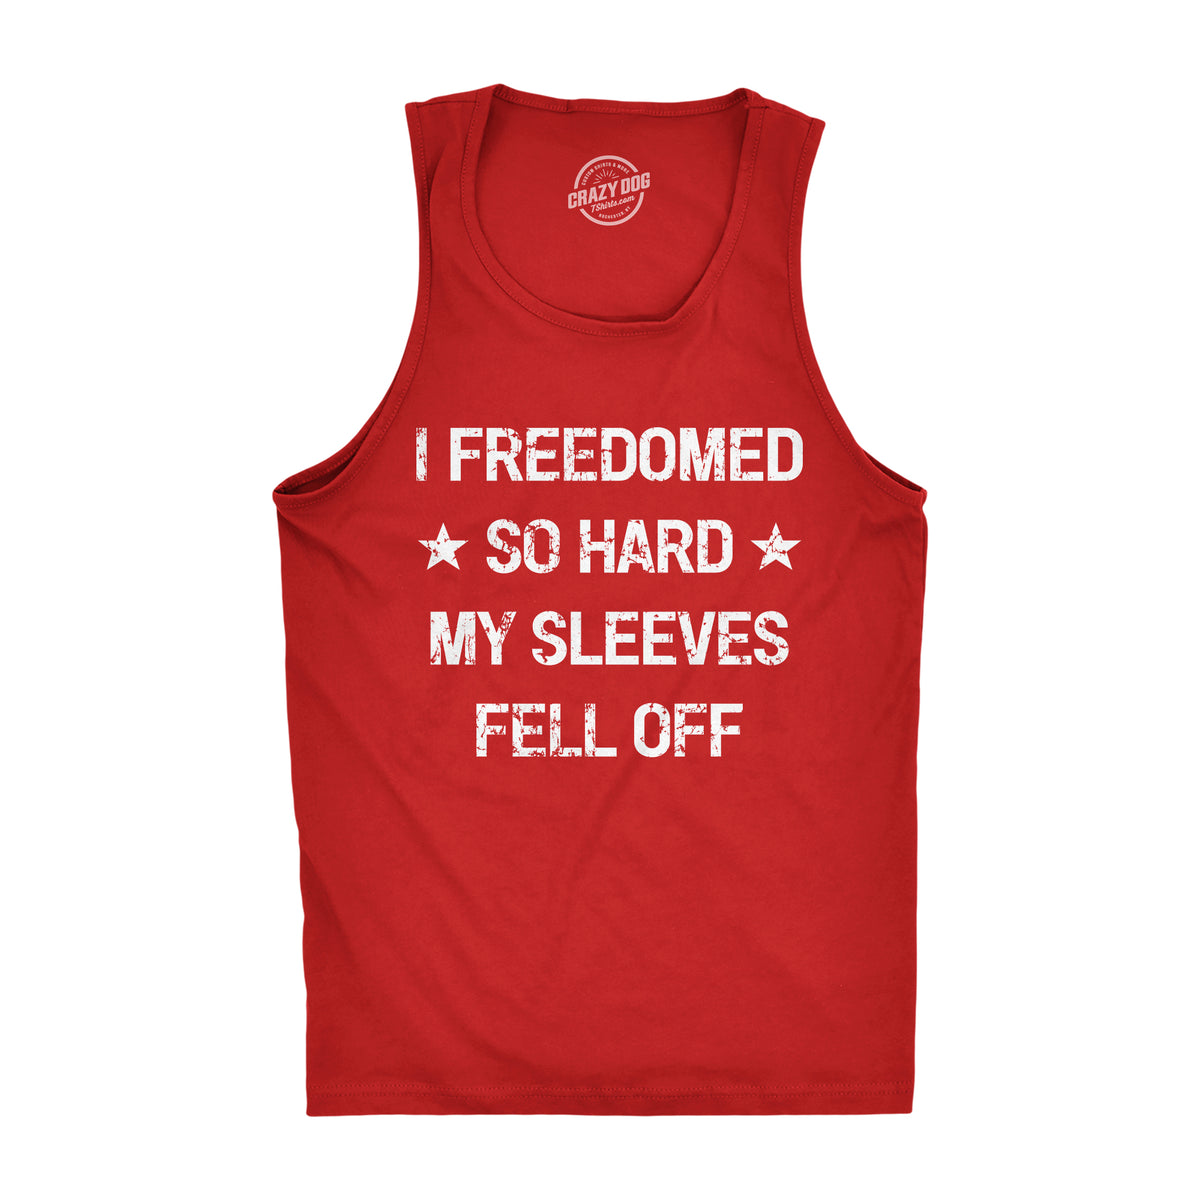 Funny Red I Freedomed So Hard My Sleeves Fell Off Mens Tank Top Nerdy Fourth of July Tee